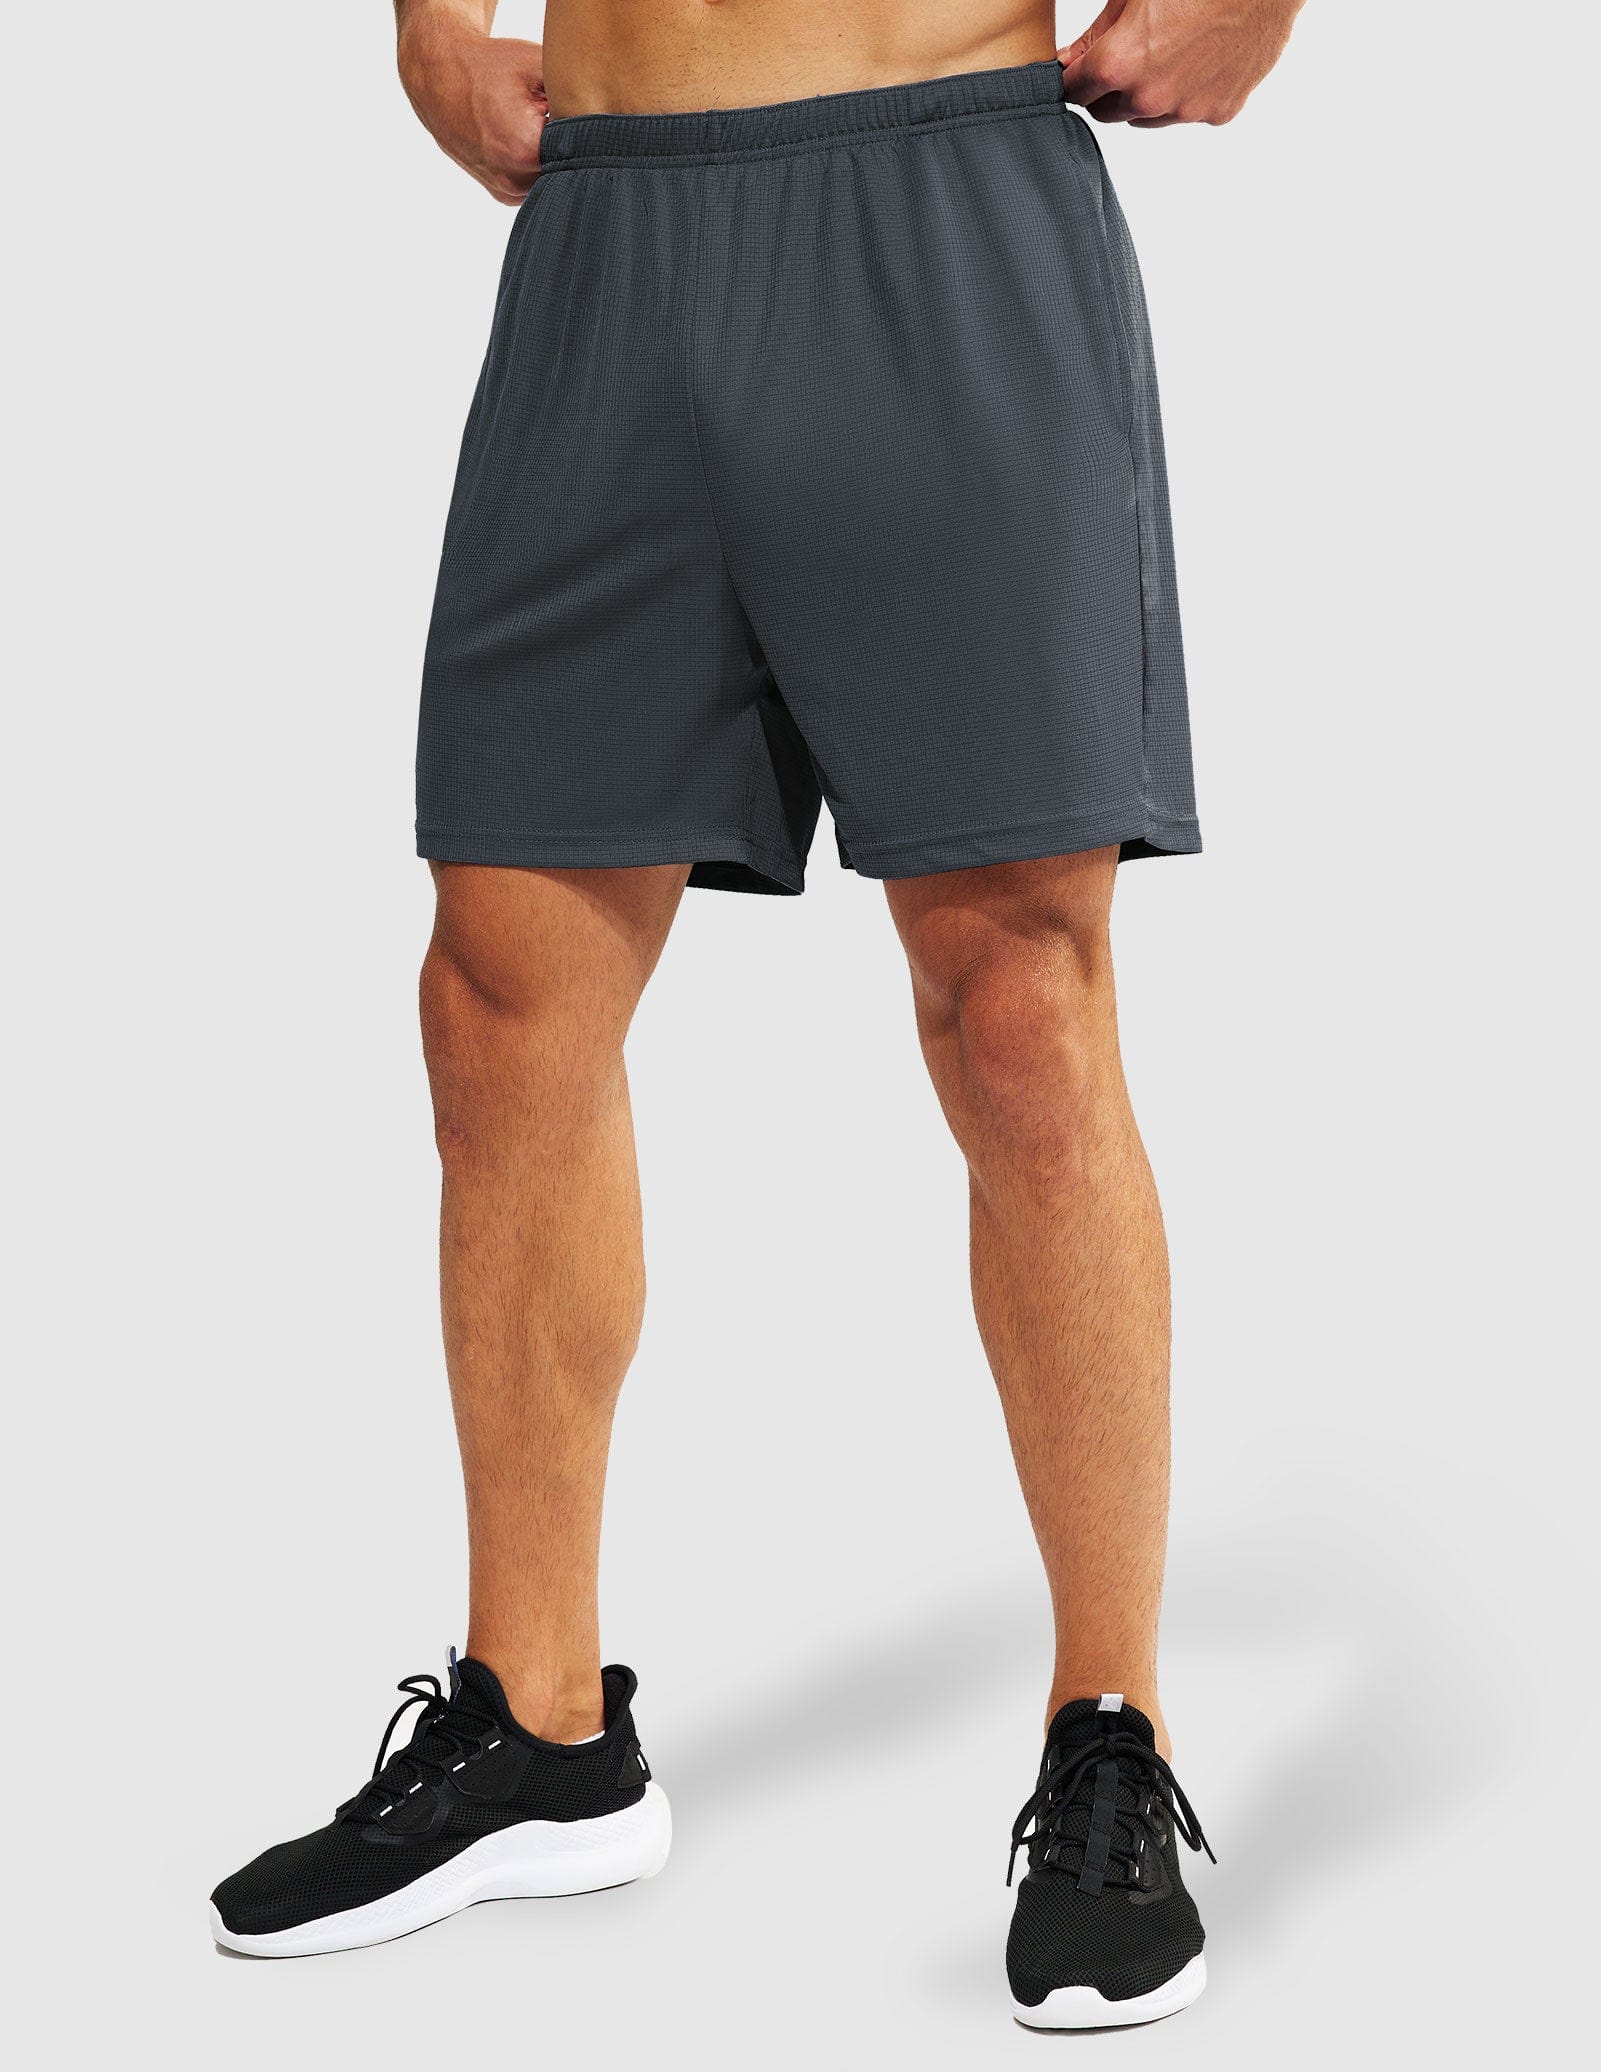 Men's Running Shorts Without Liner  Combat Iron Apparel Co. – Page 2